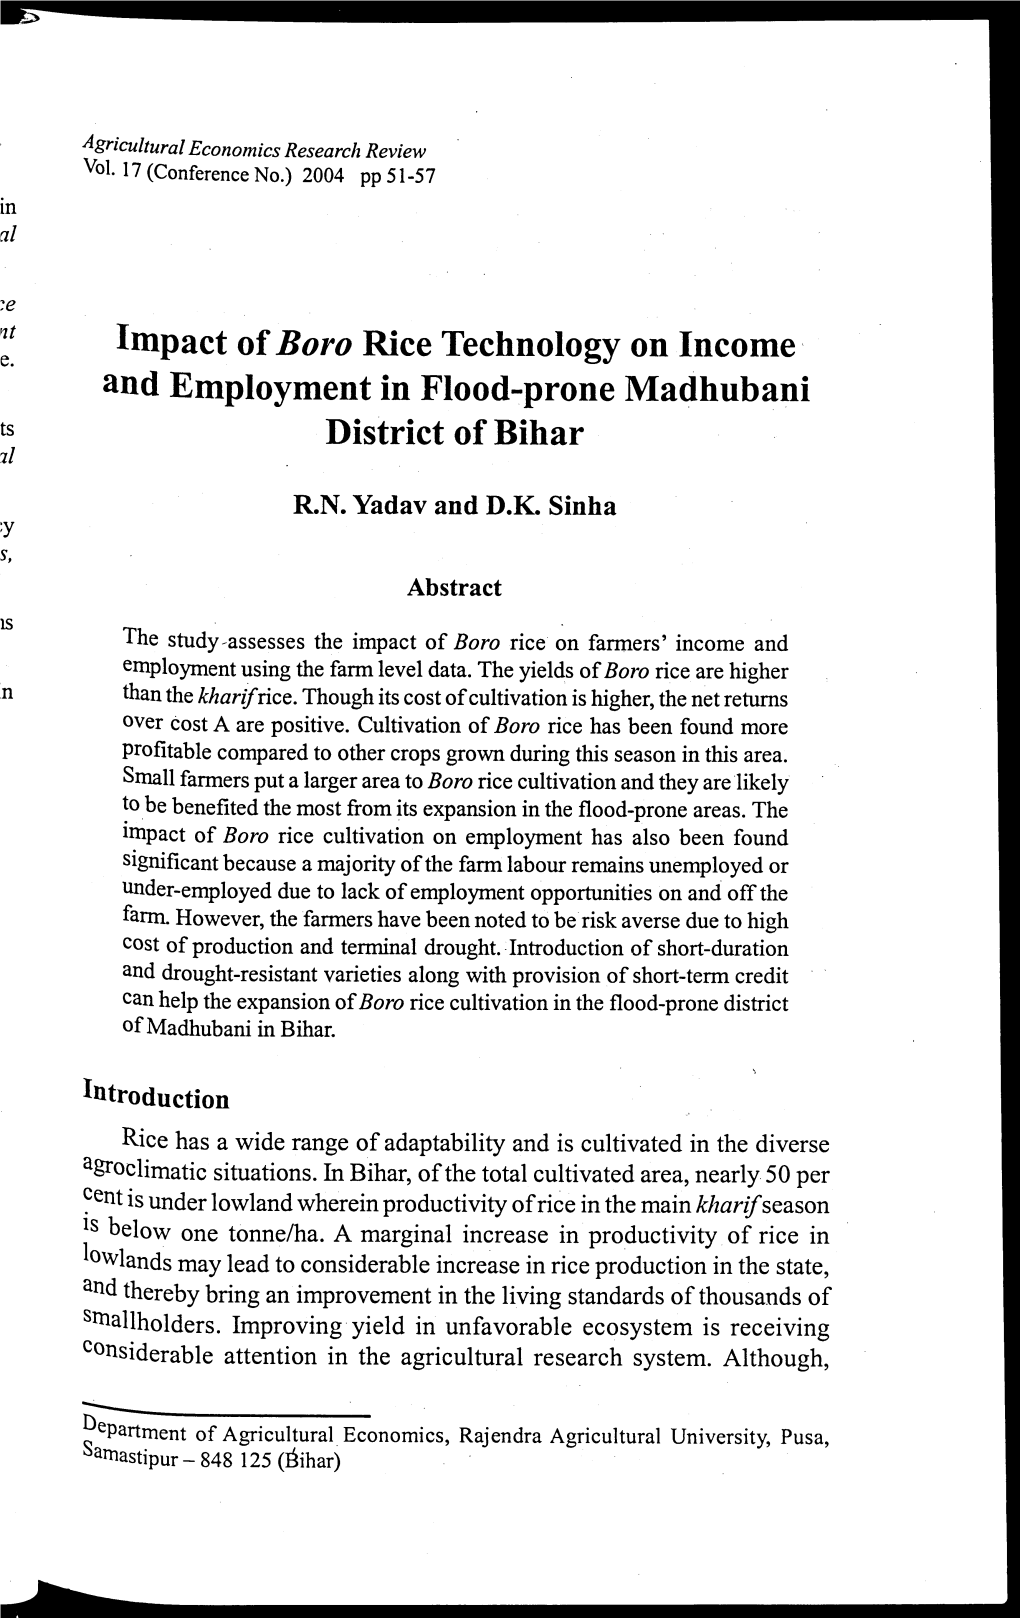 Impact of Boro Rice Technology on Income and Employment in Flood-Prone Madhubani District of Bihar